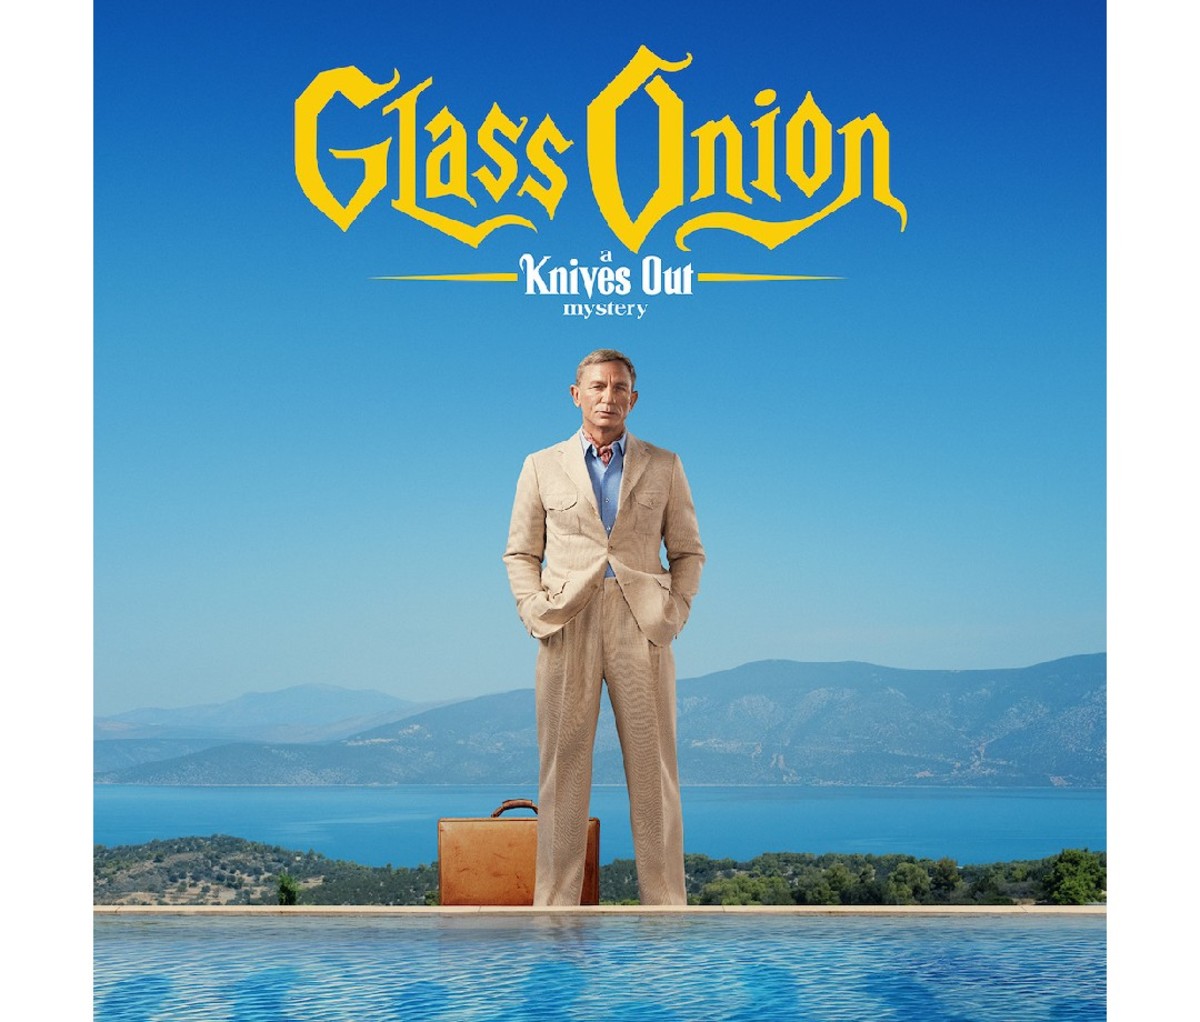 Movie poster for Glass Onion with Daniel Craig.